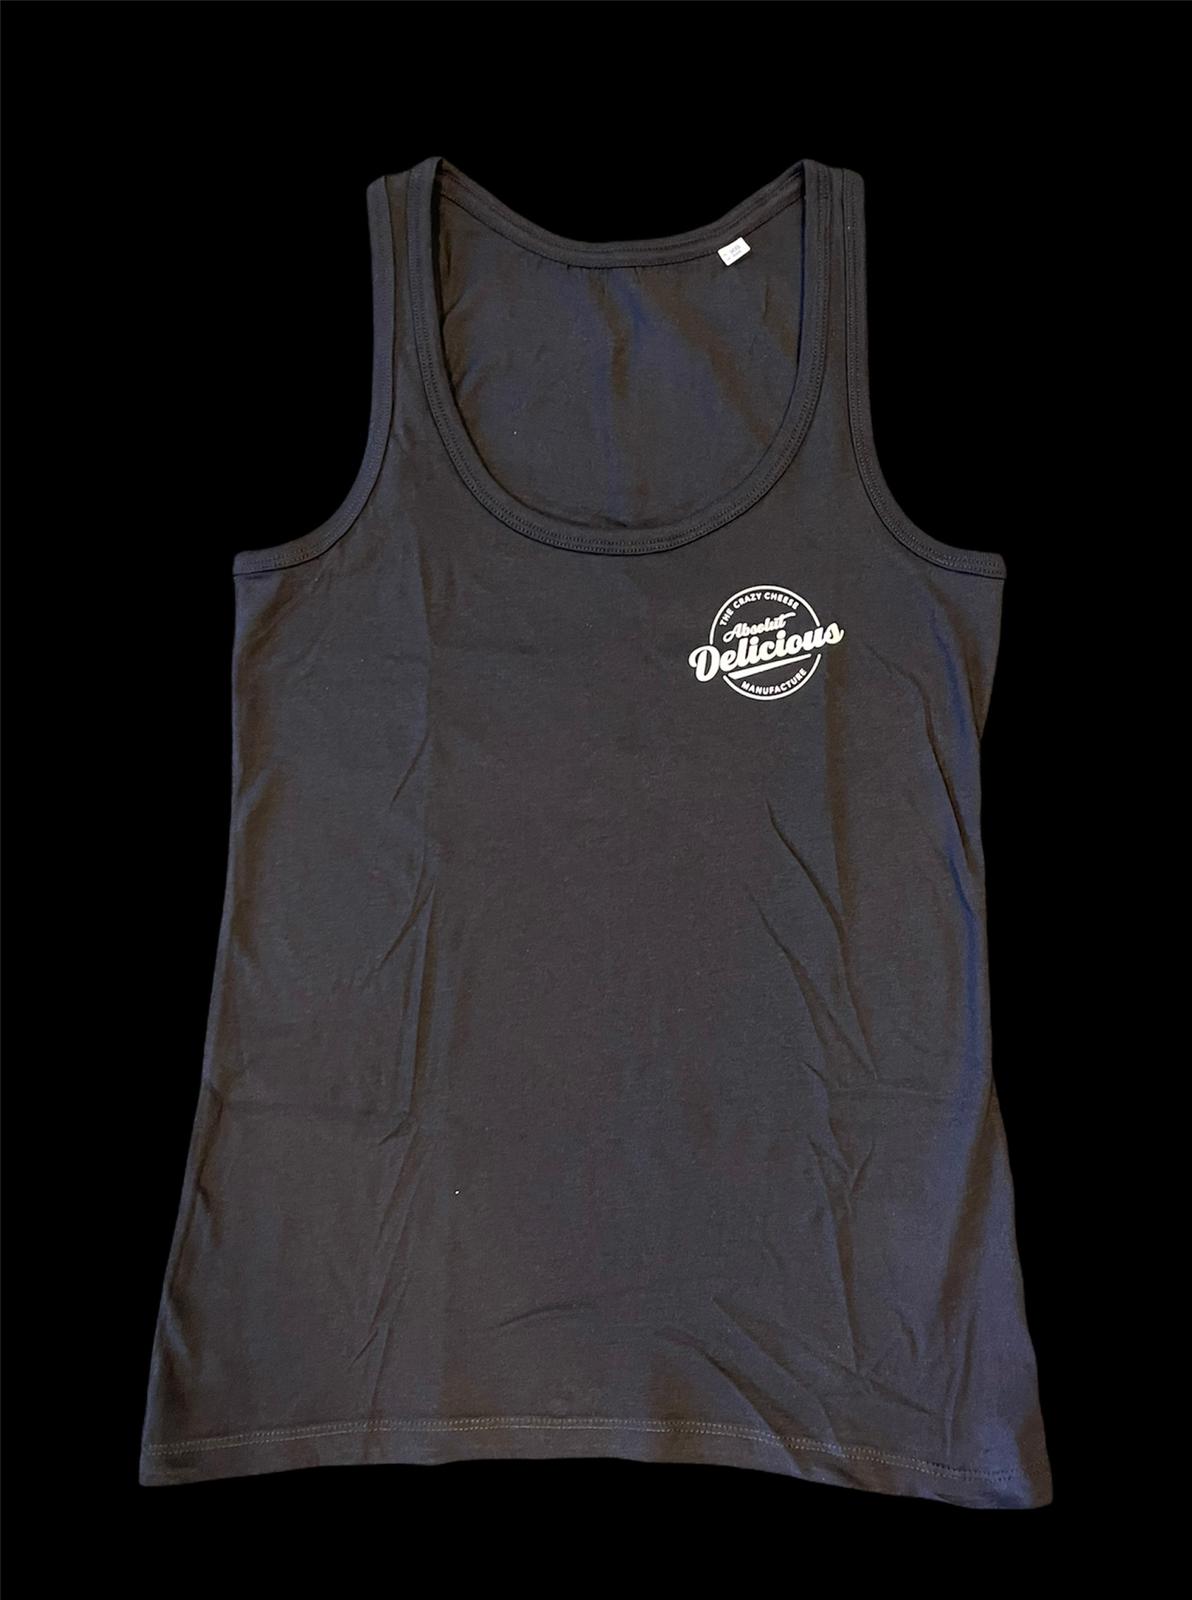 "Absolut Delicious" Tank-Top